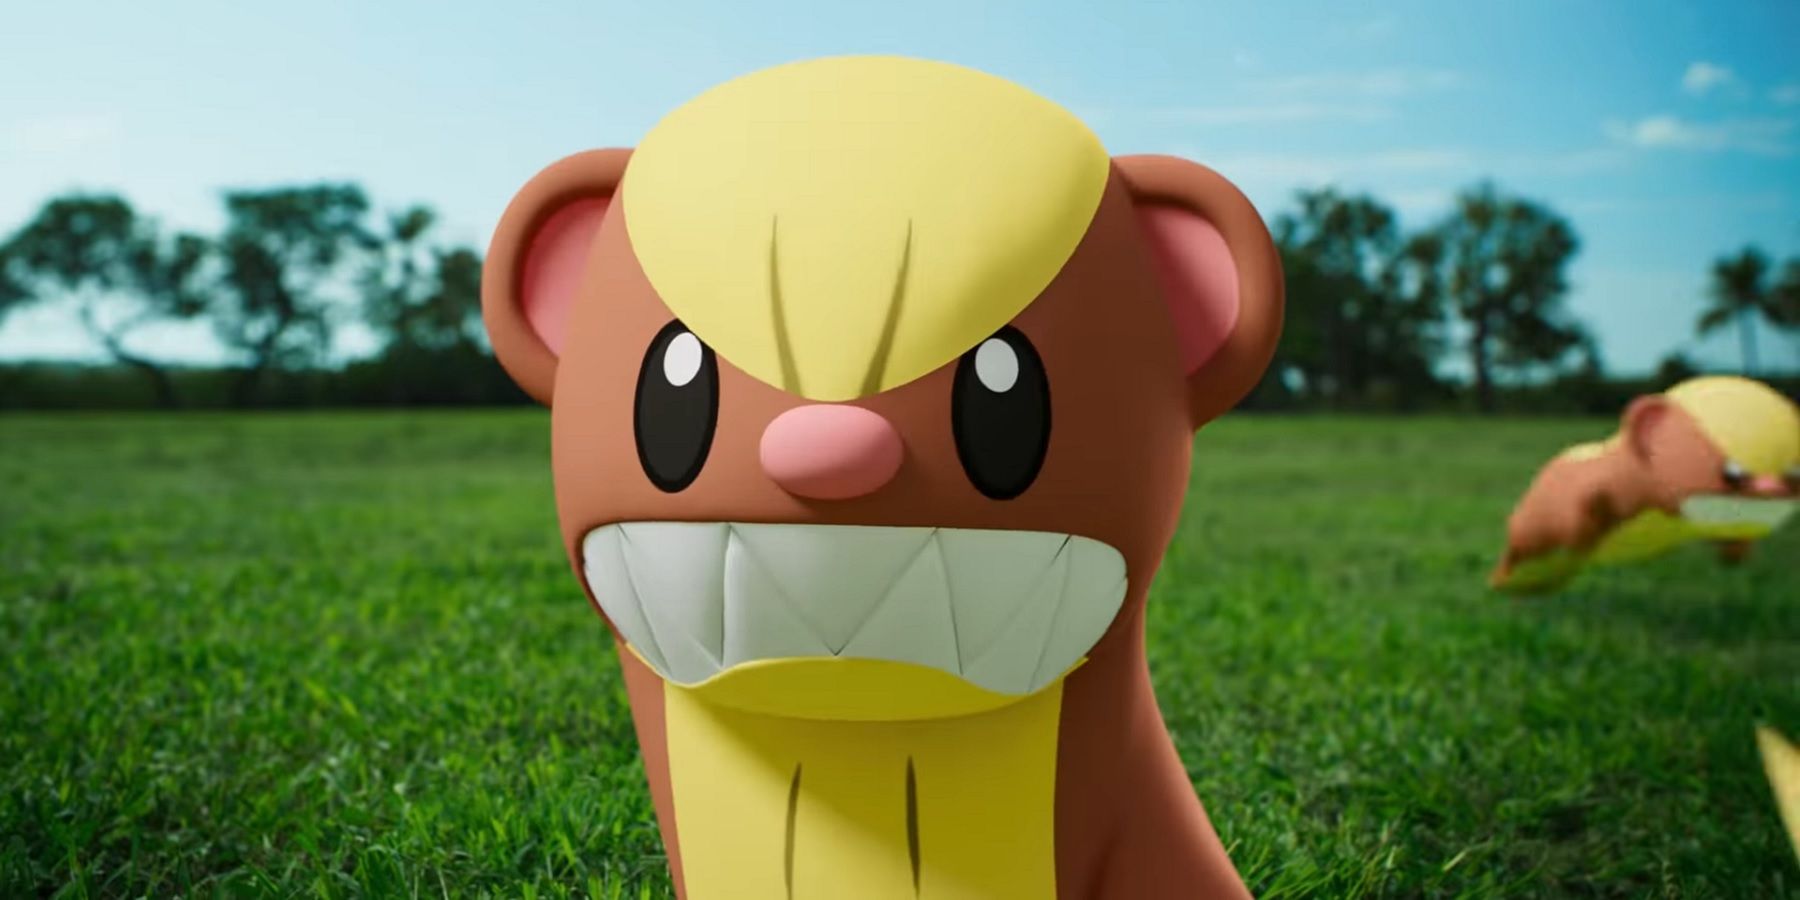 Pokemon GO is Shutting Down in Russia and Belarus